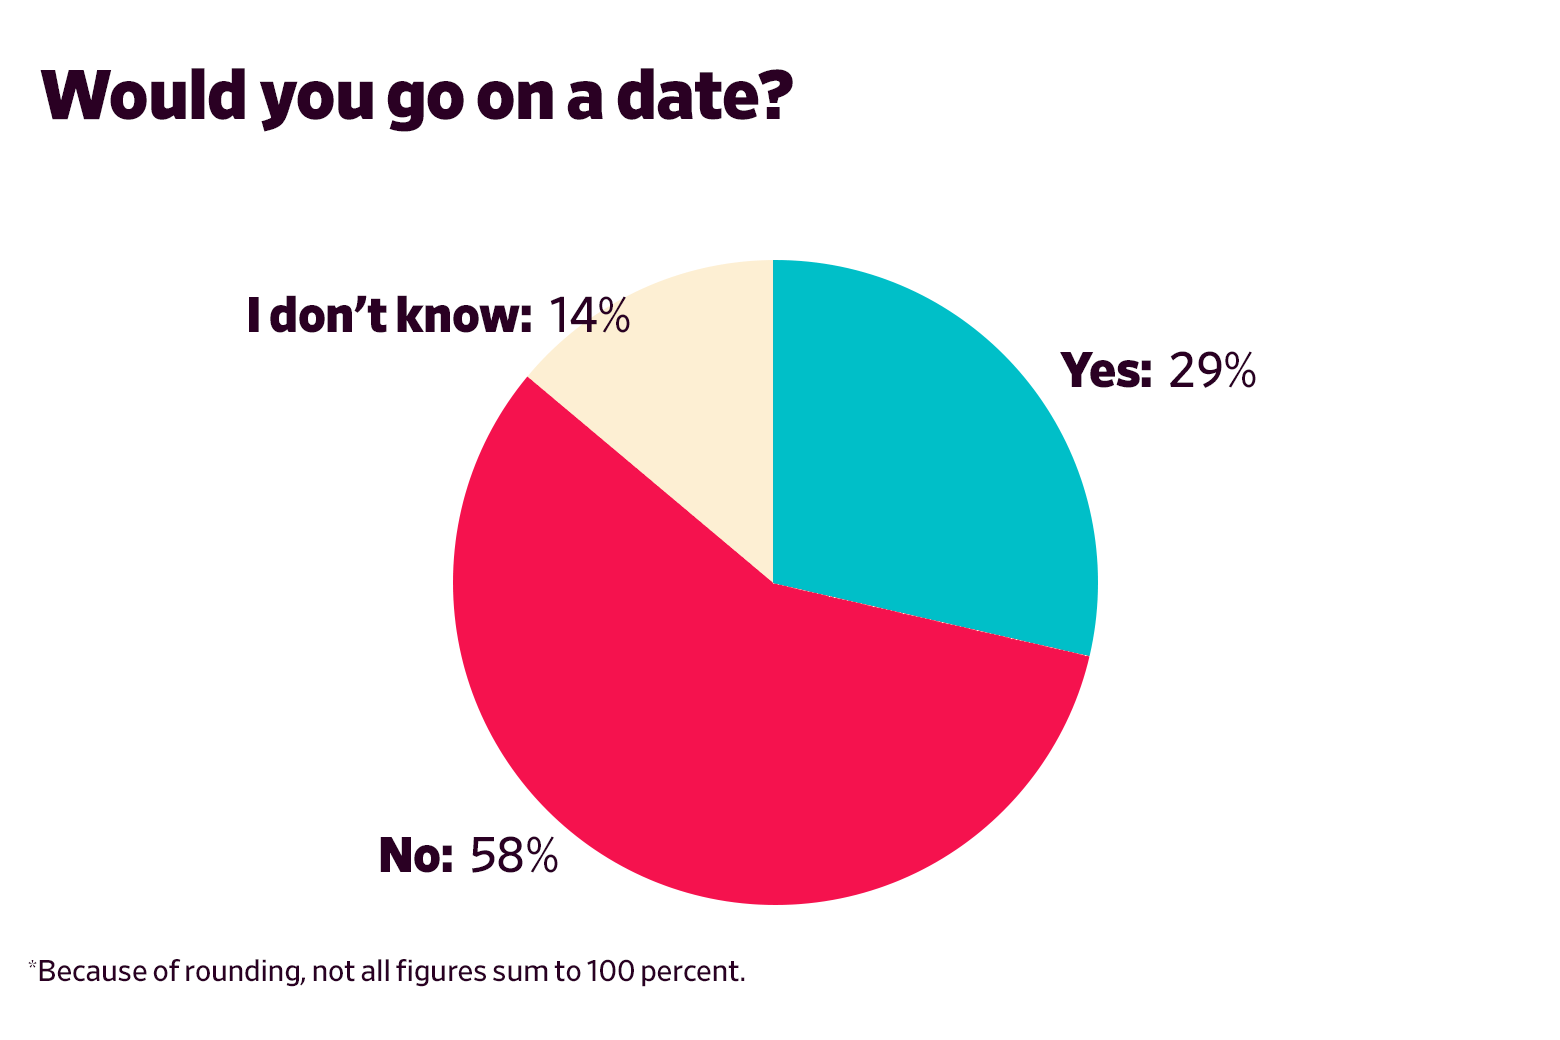 Would you go on a date? Yes: 29 No: 58 I don’t know: 14 (excludes N/A